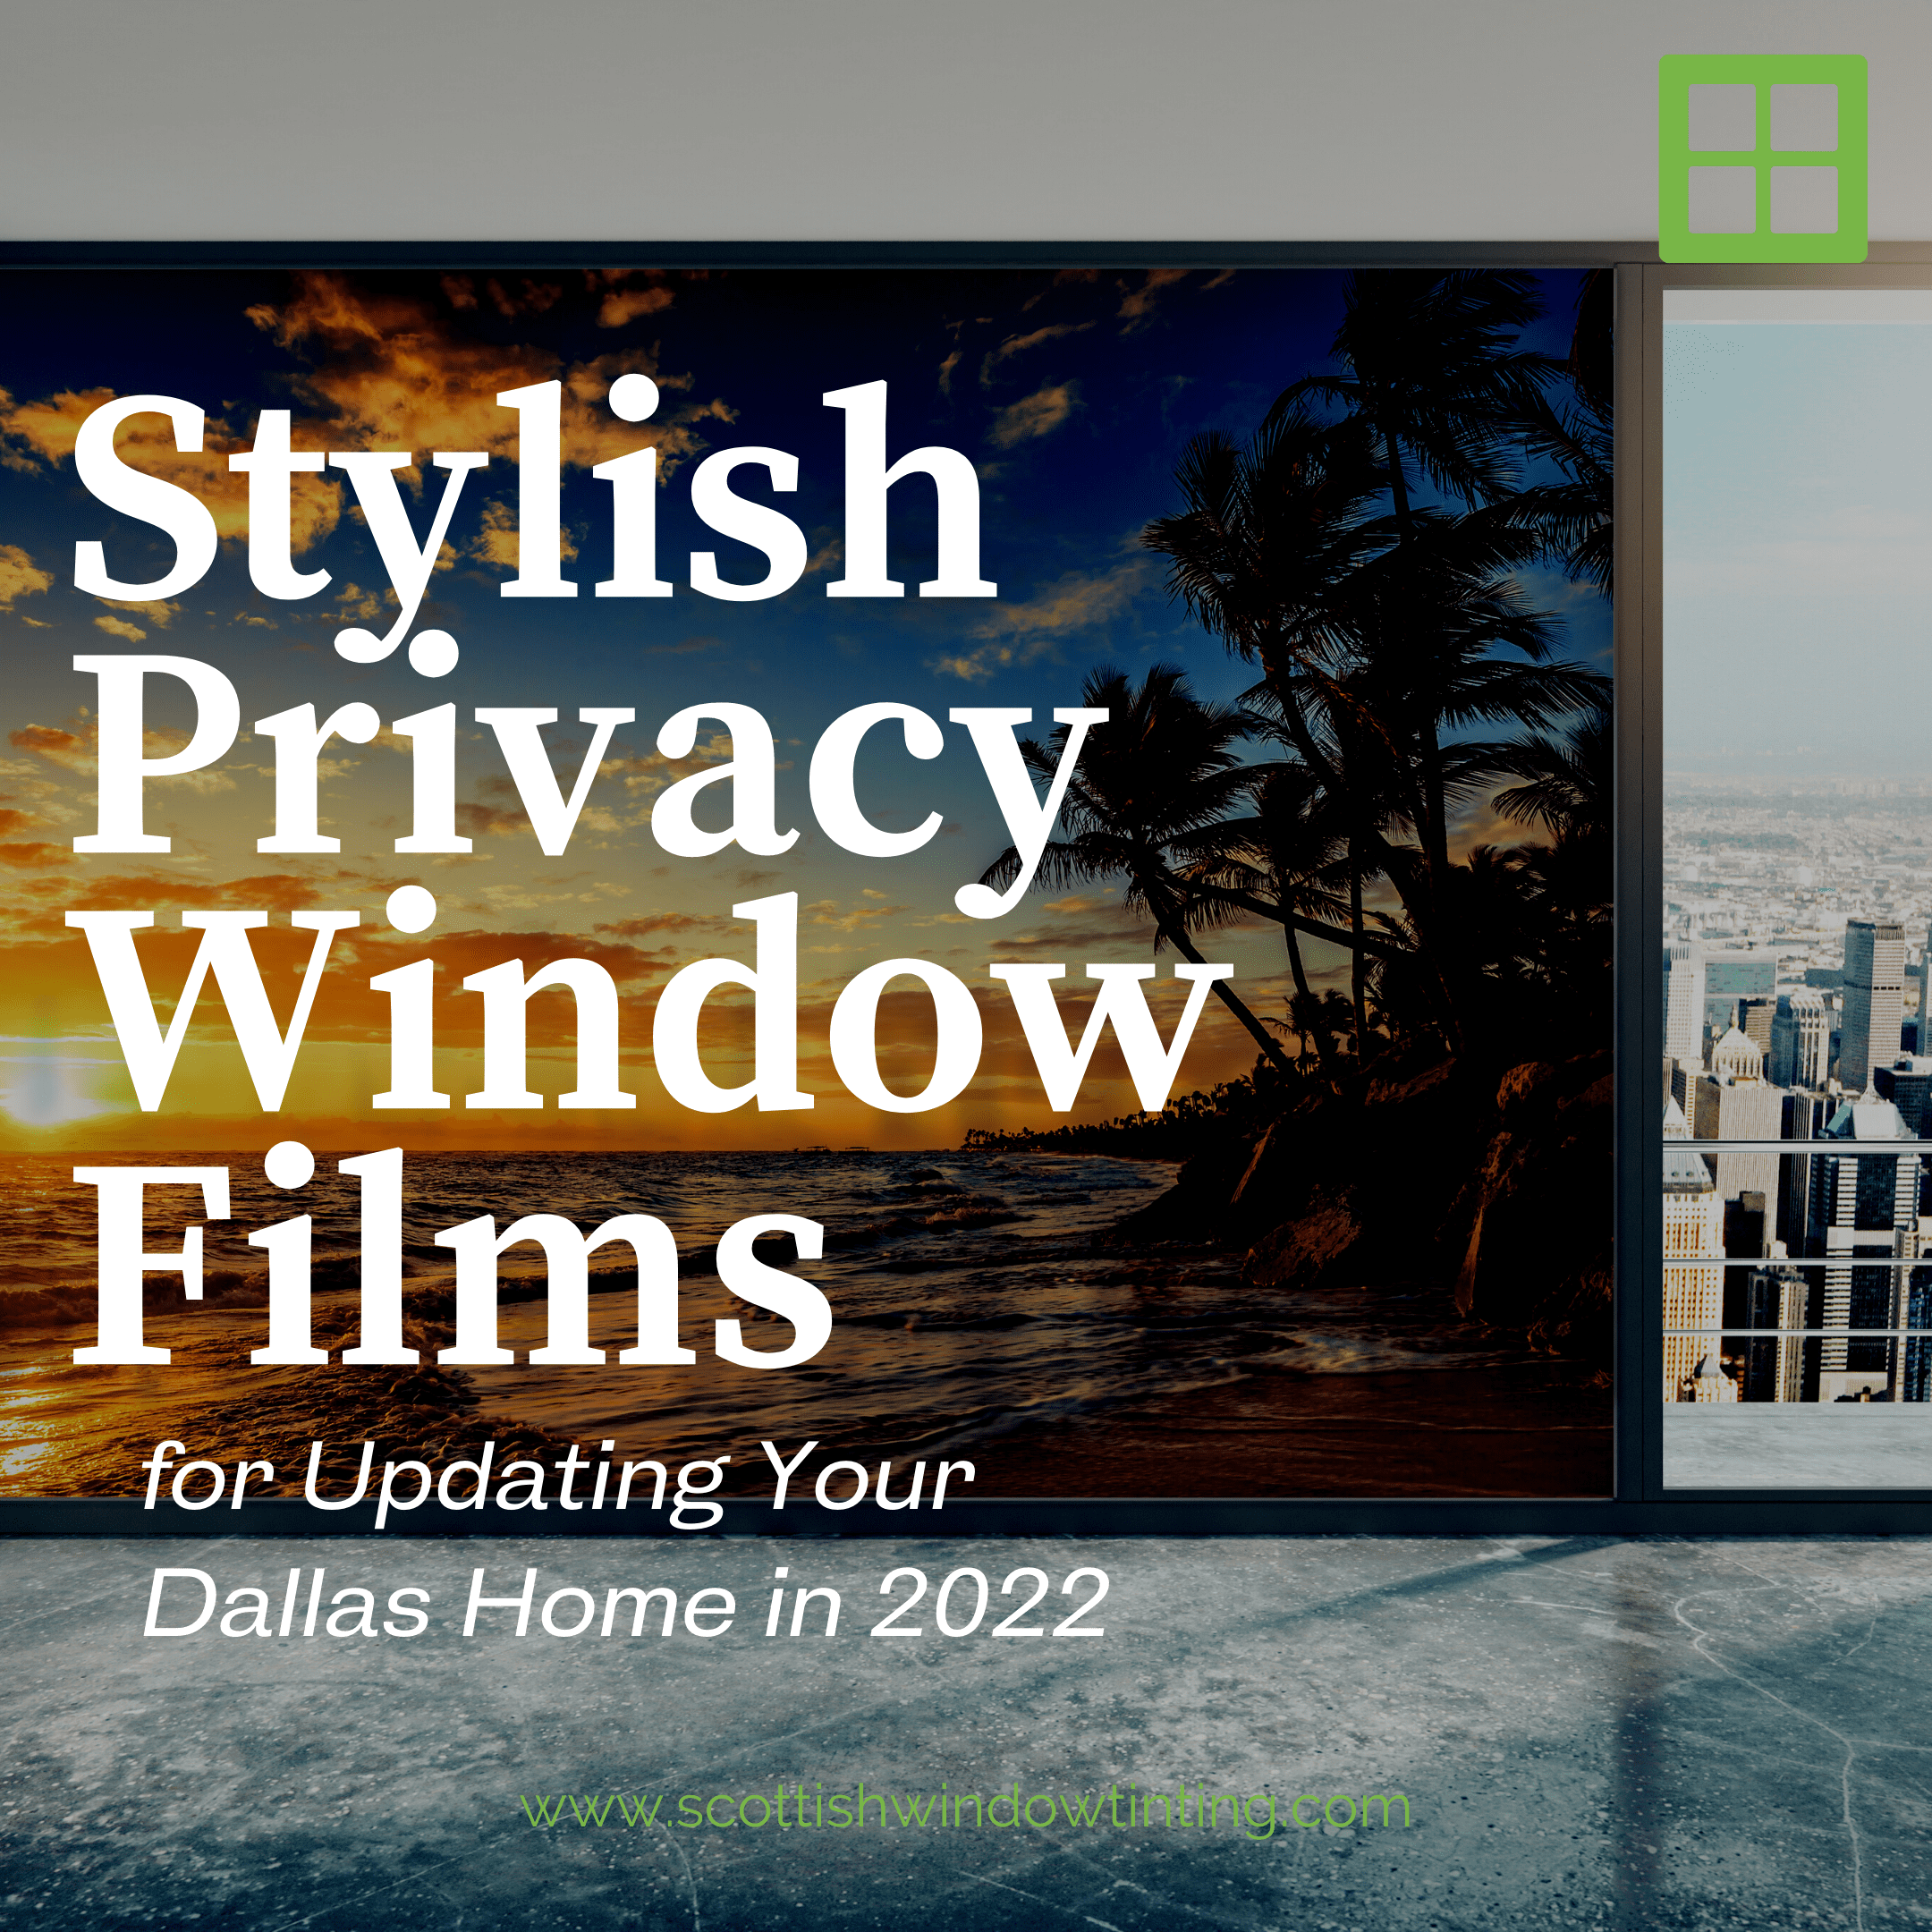 Stylish Privacy Window Films for Updating Your Dallas Home in 2022